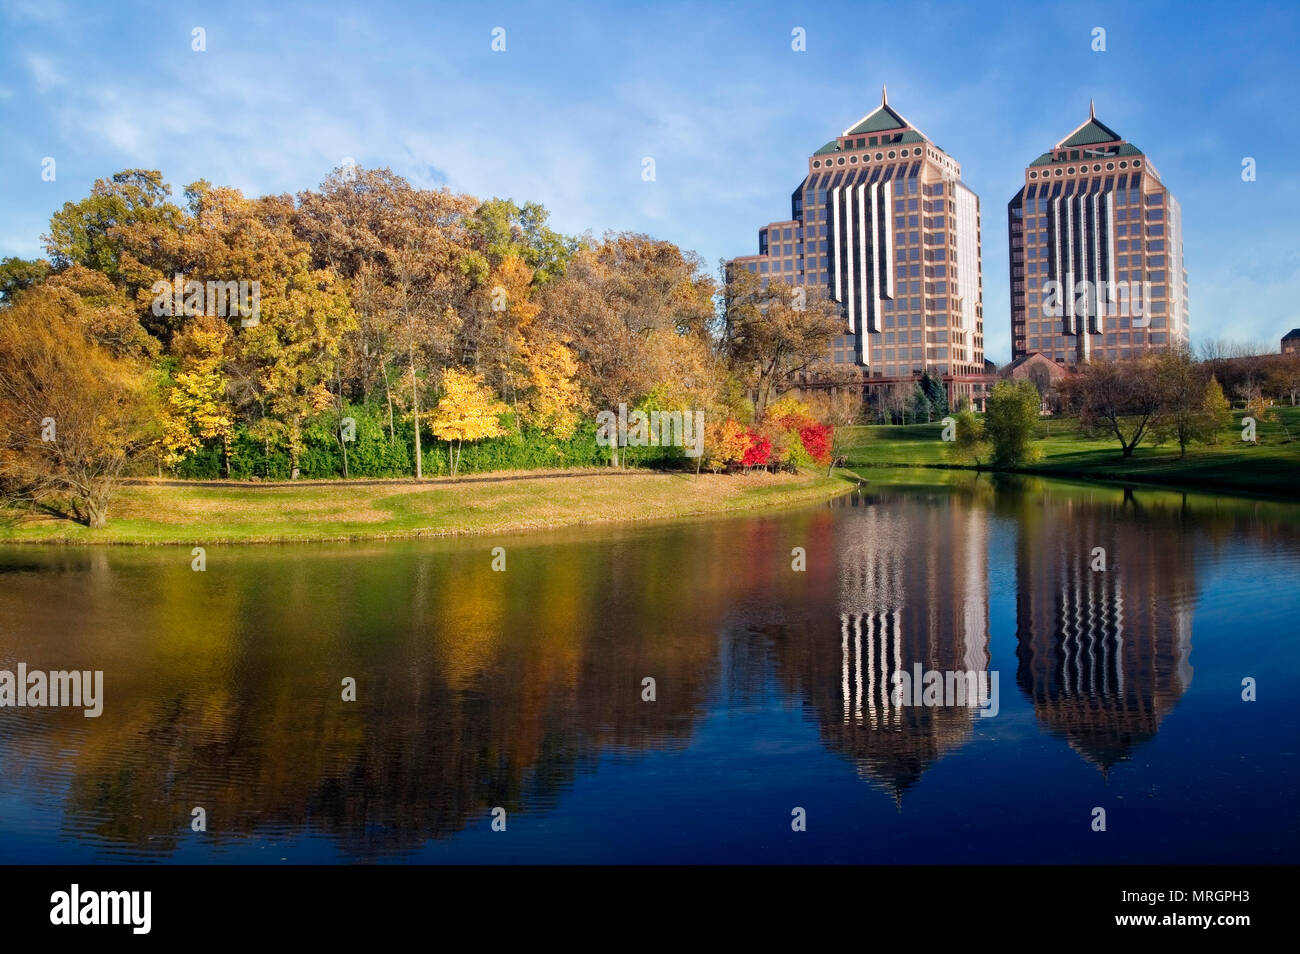 The twin Carlson Towers in Minnetonka, Minnesota are named after the late Curt Carlson. Stock Photo